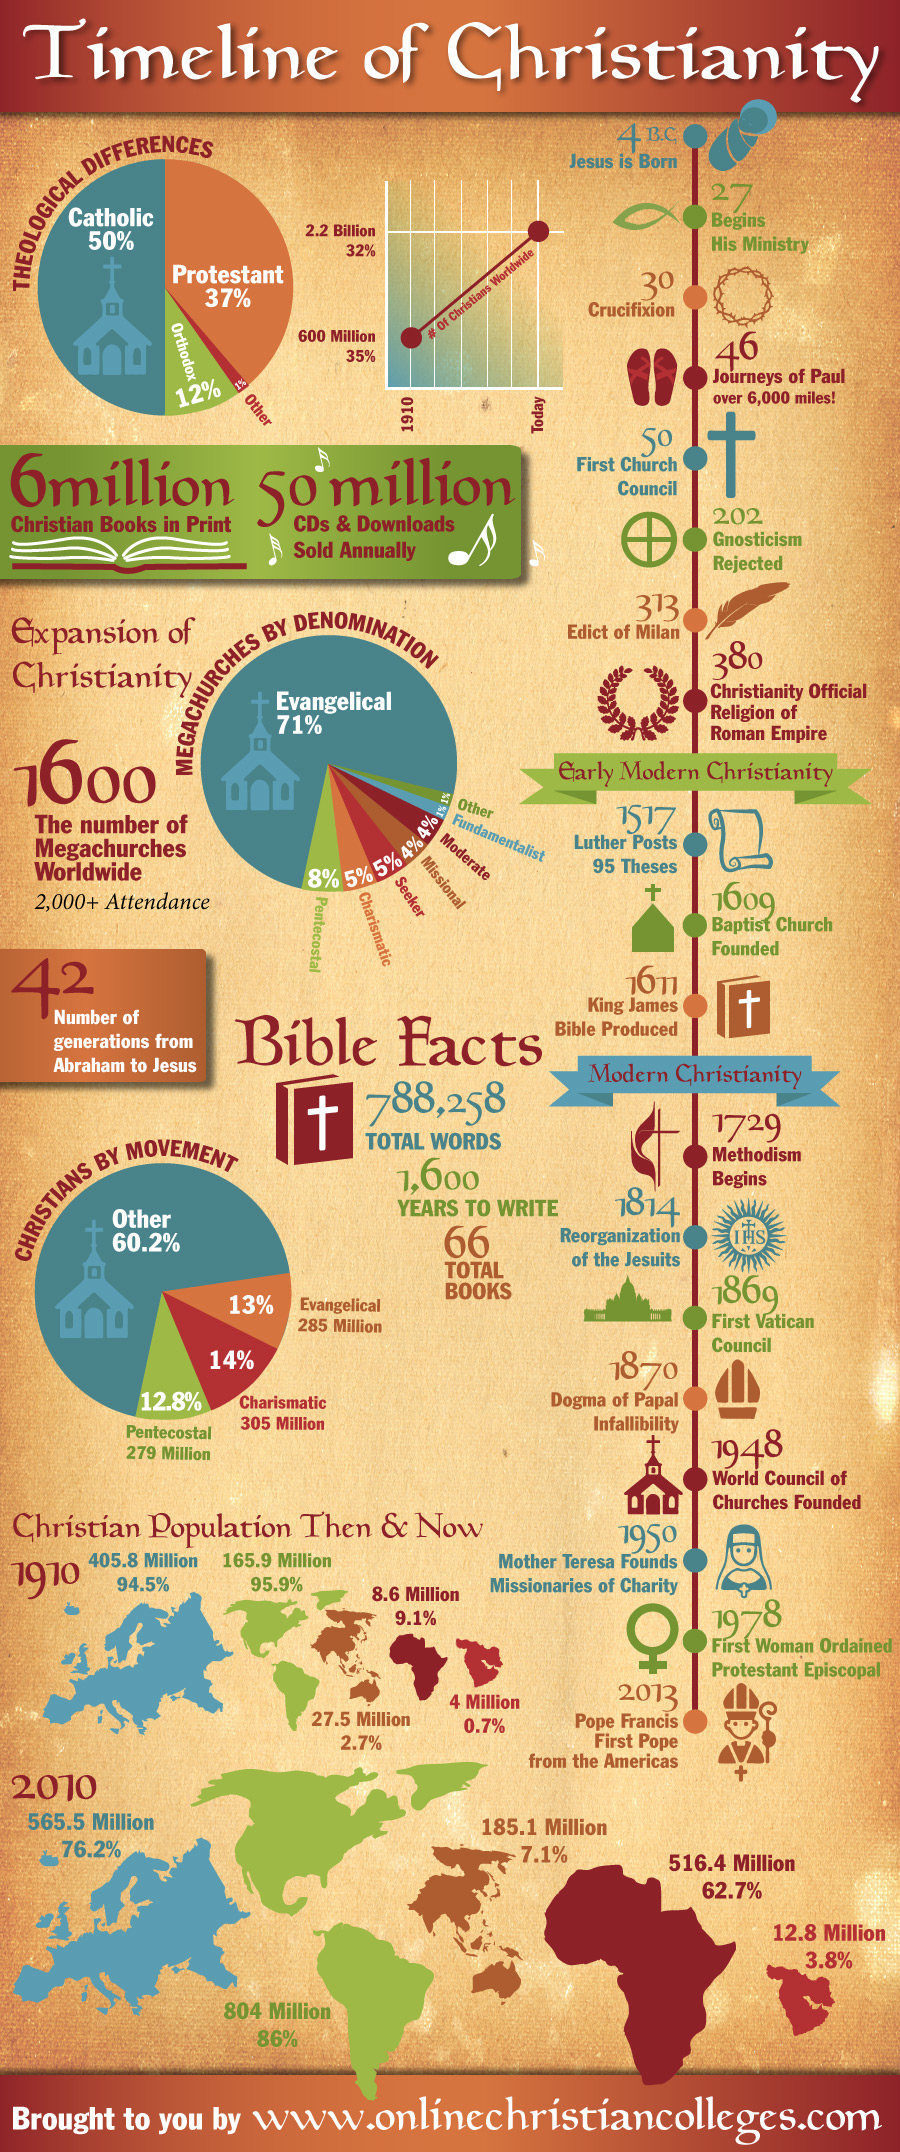 timeline of christianity infographic